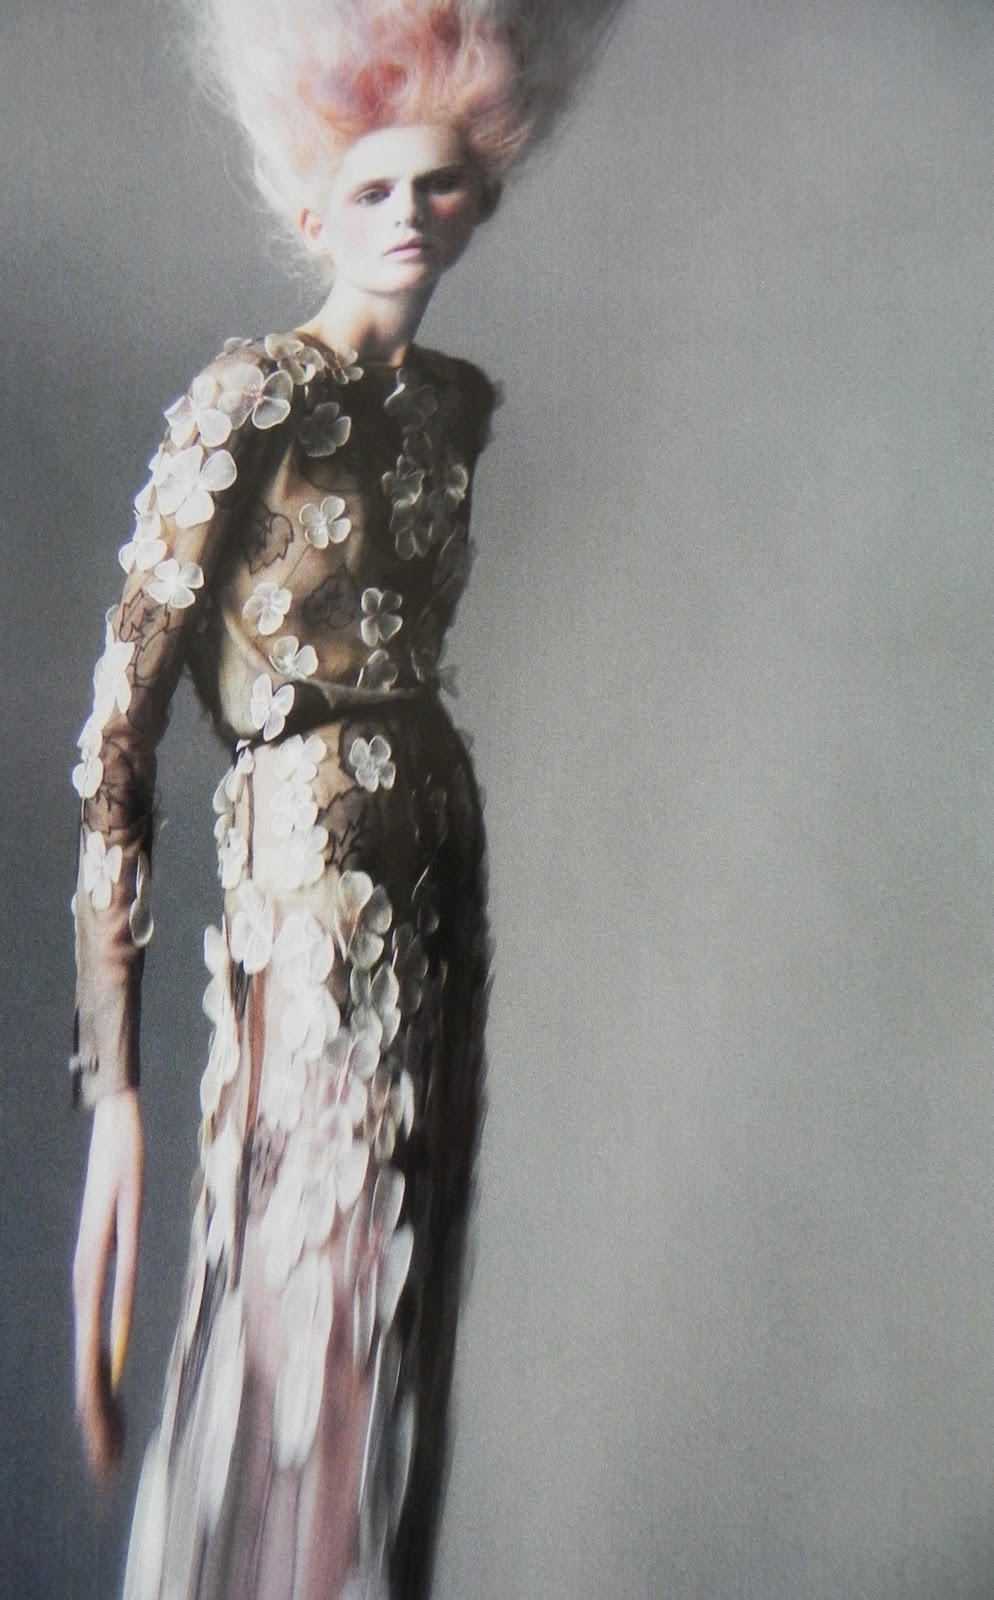 ANDREA JANKE Finest Accessories: VALENTINO Couture 2011 - Dreamy Appeal